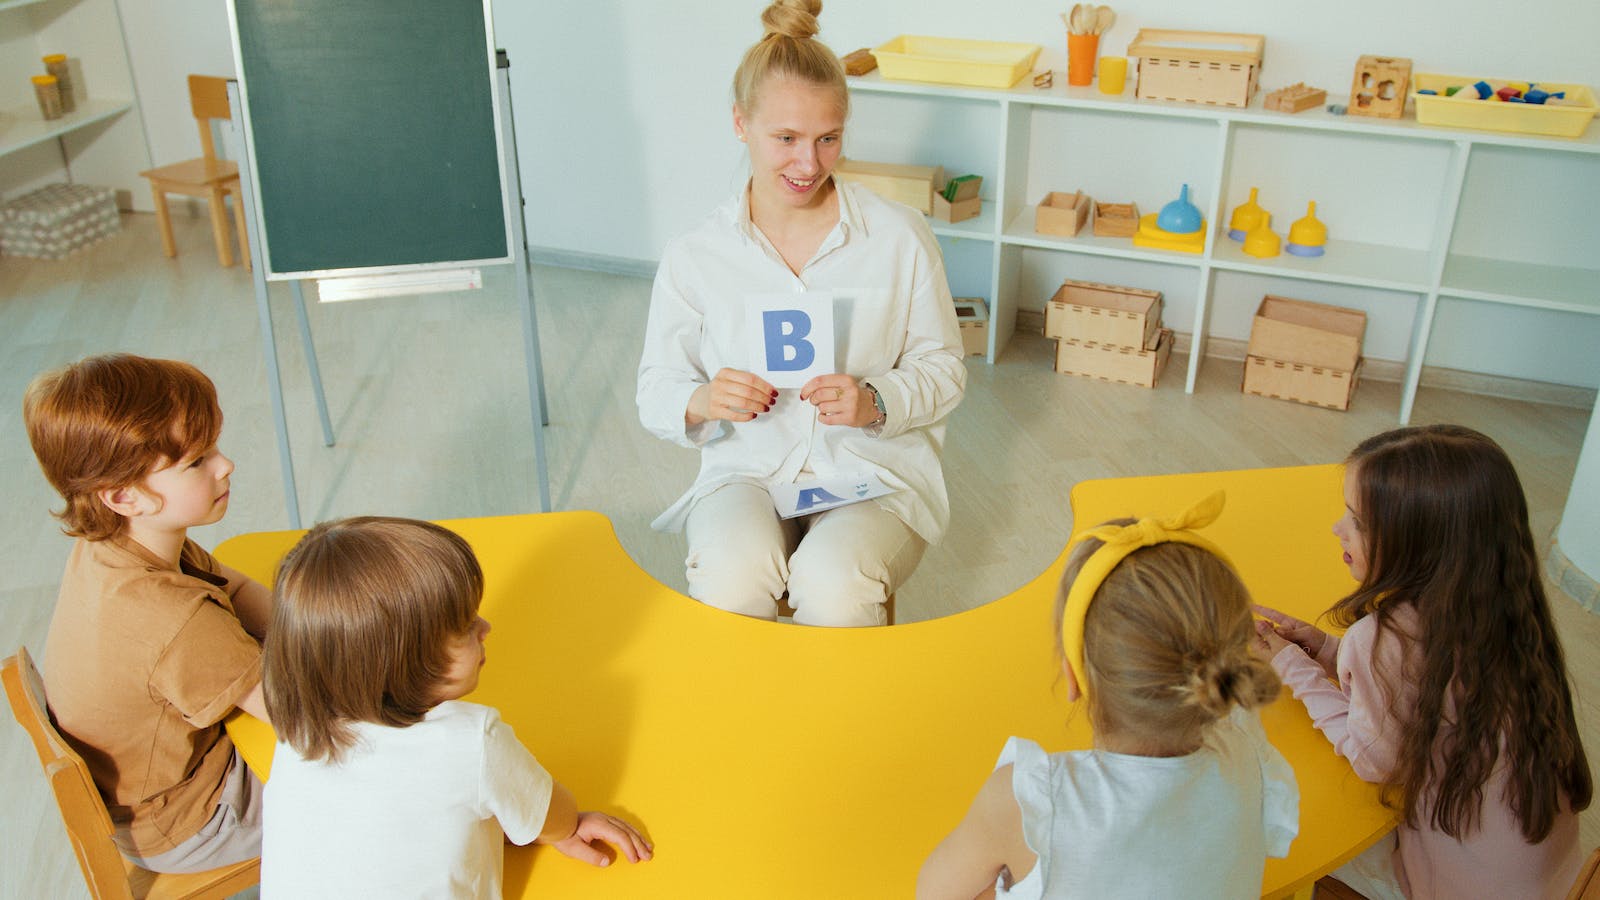 A Woman in White Long Sleeves Sitting in Front of the Kids